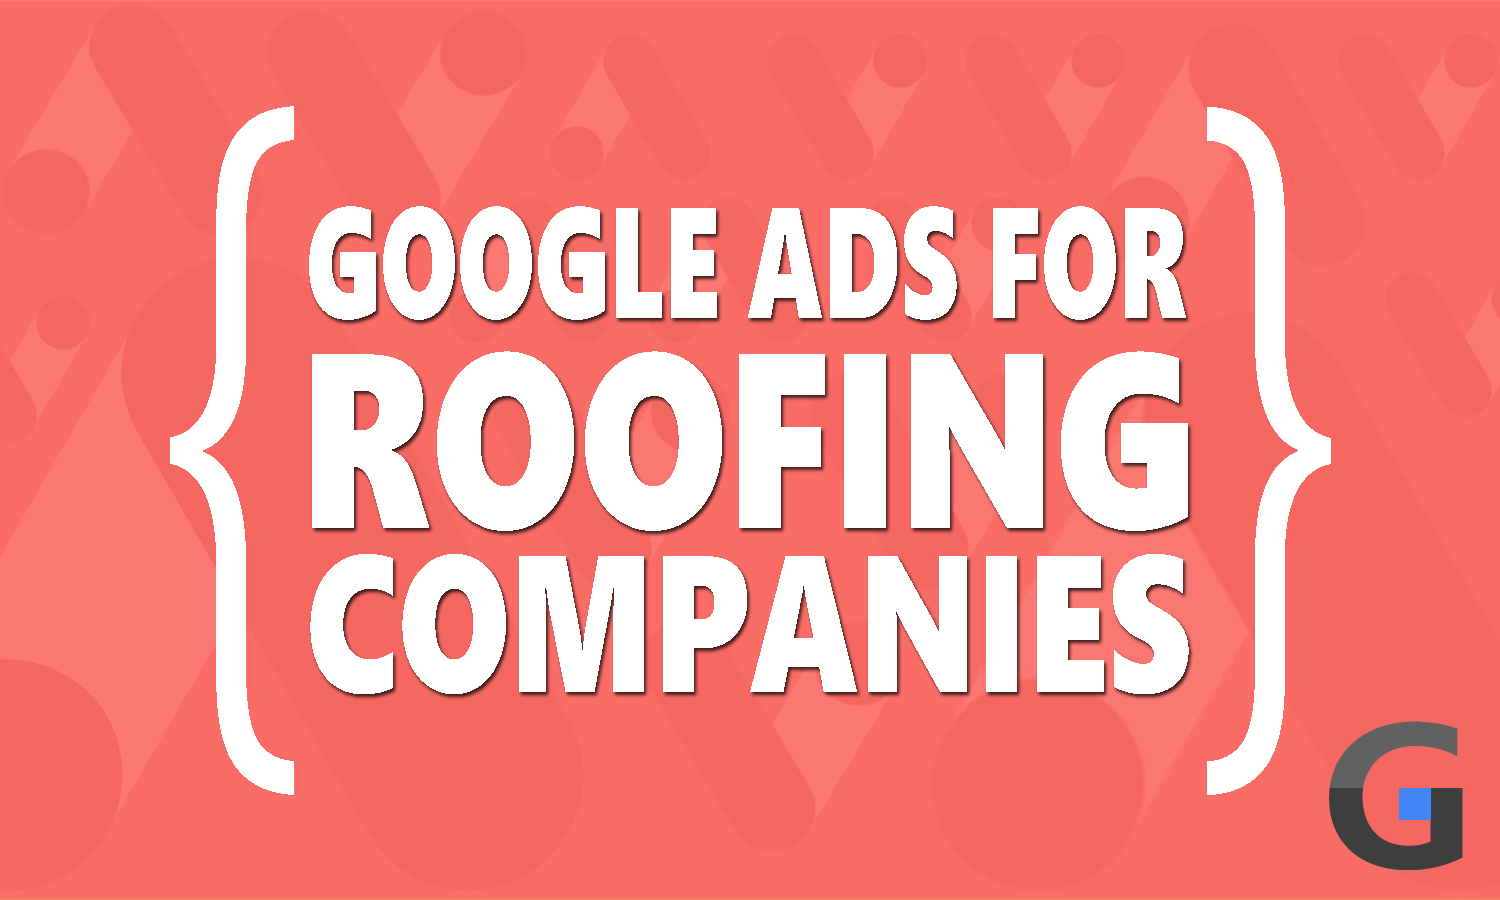 Google Ads for roofers